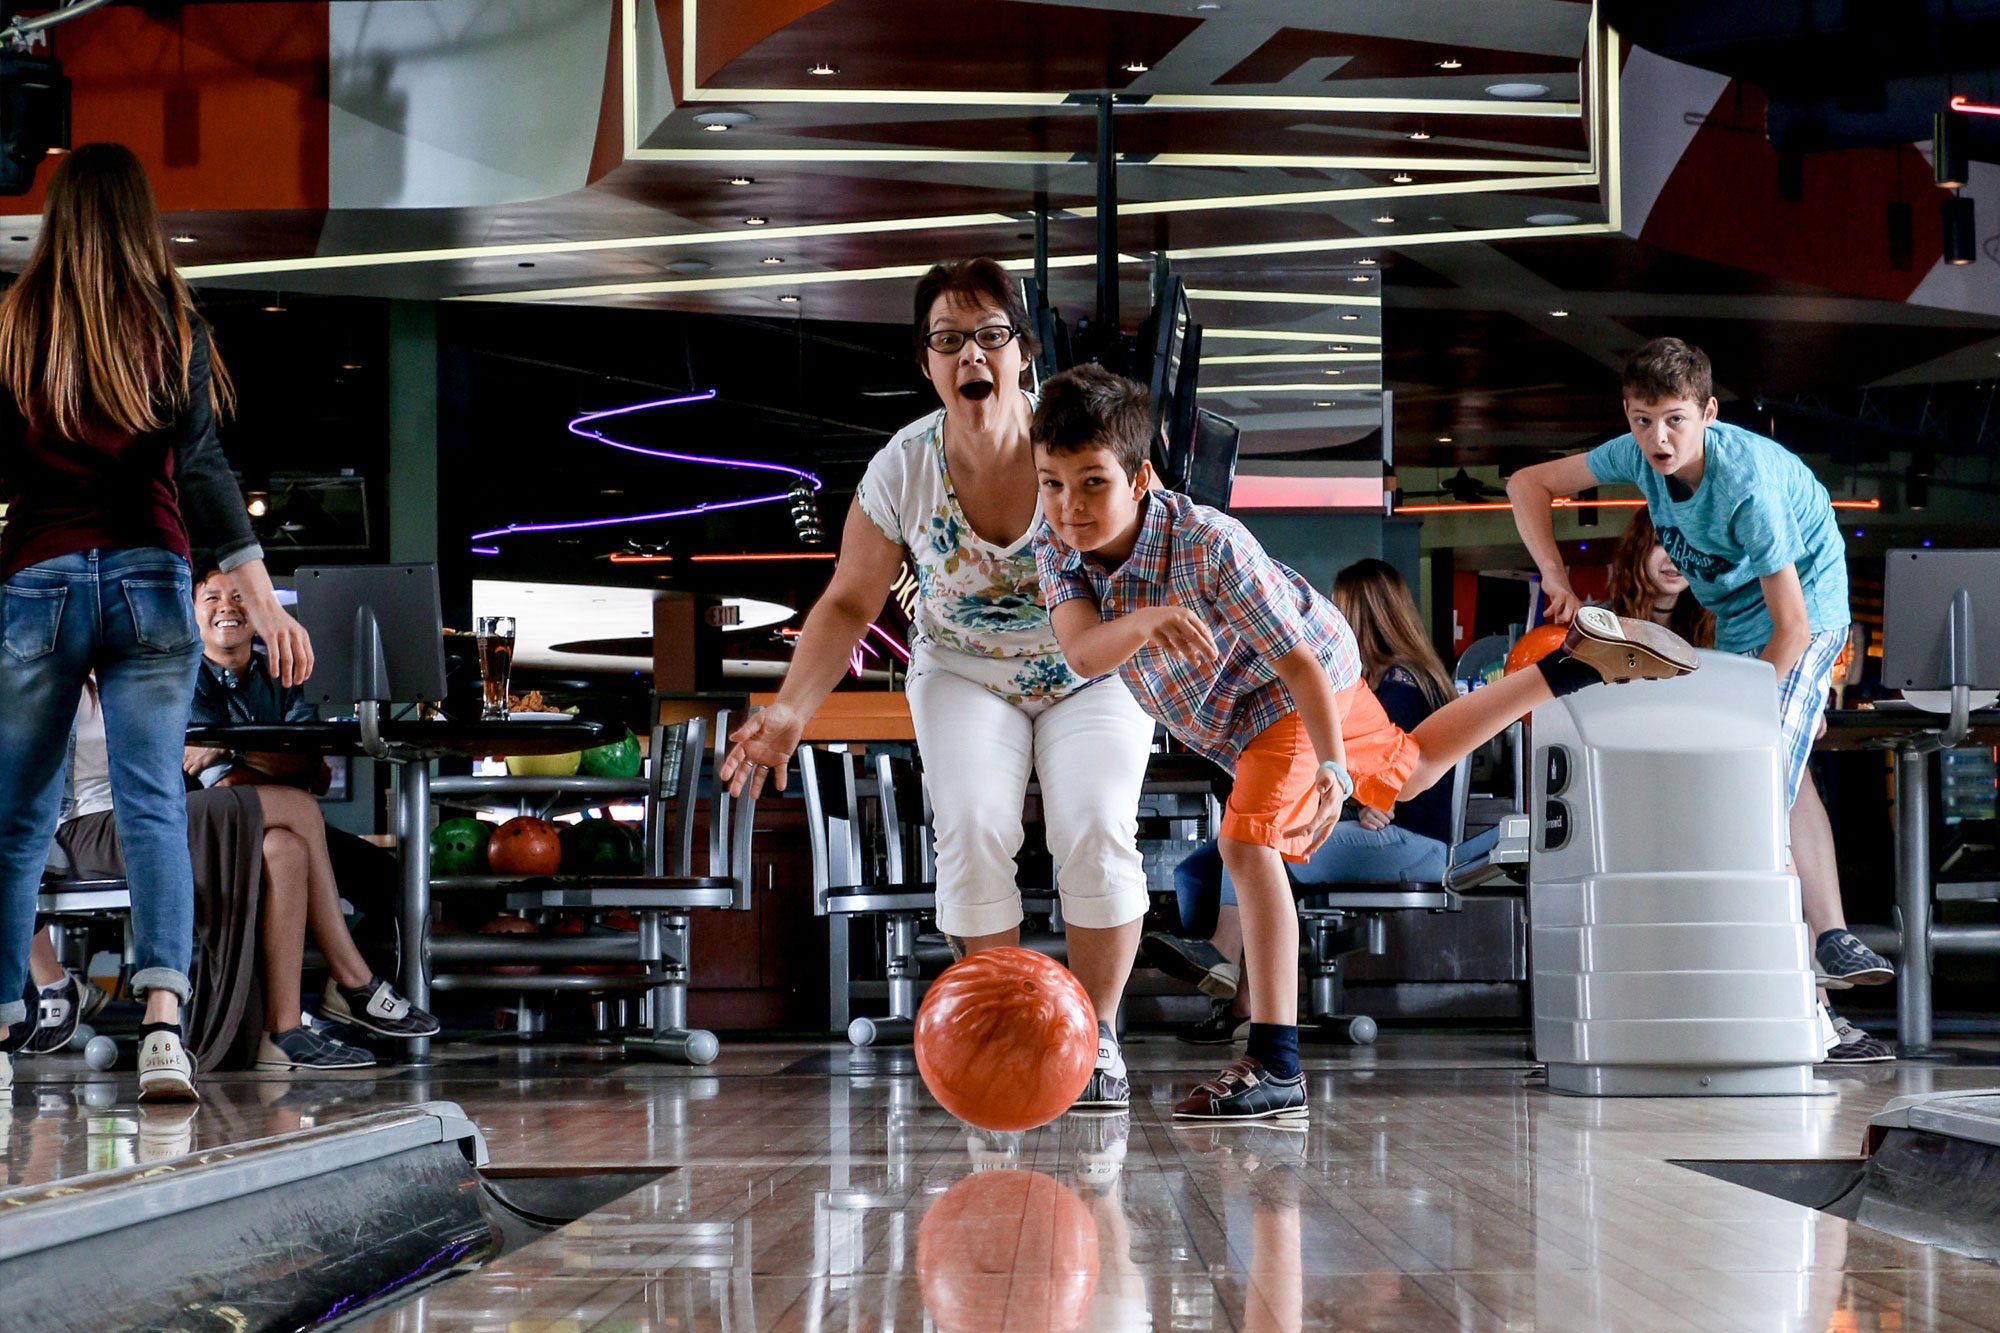 Mom bowling with son watching ball go down lane